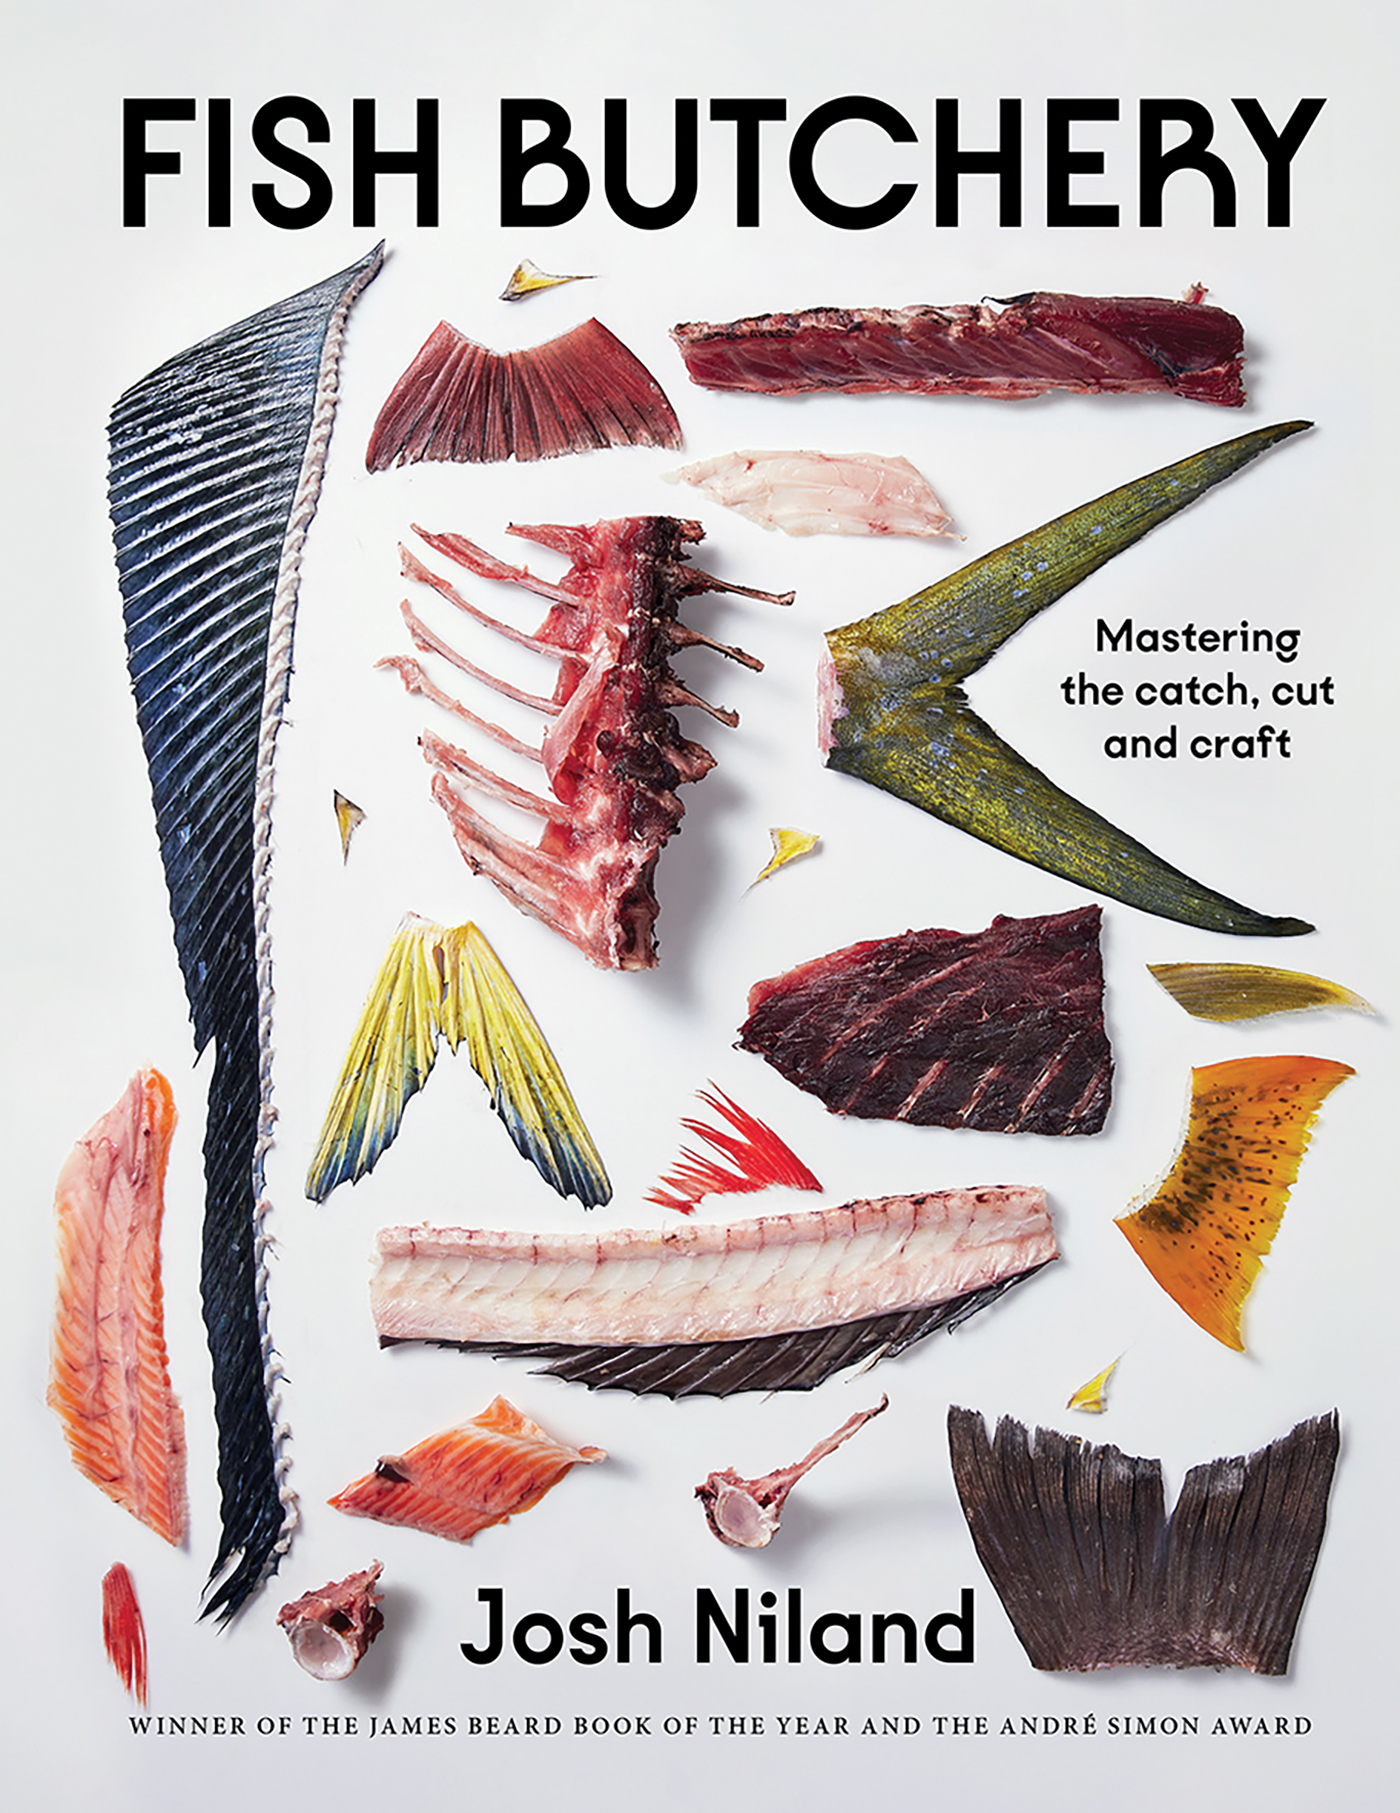 Publisher:Hardie Grant Books - Fish Butchery (Mastering The Catch, Cut And Craft) - Josh Niland